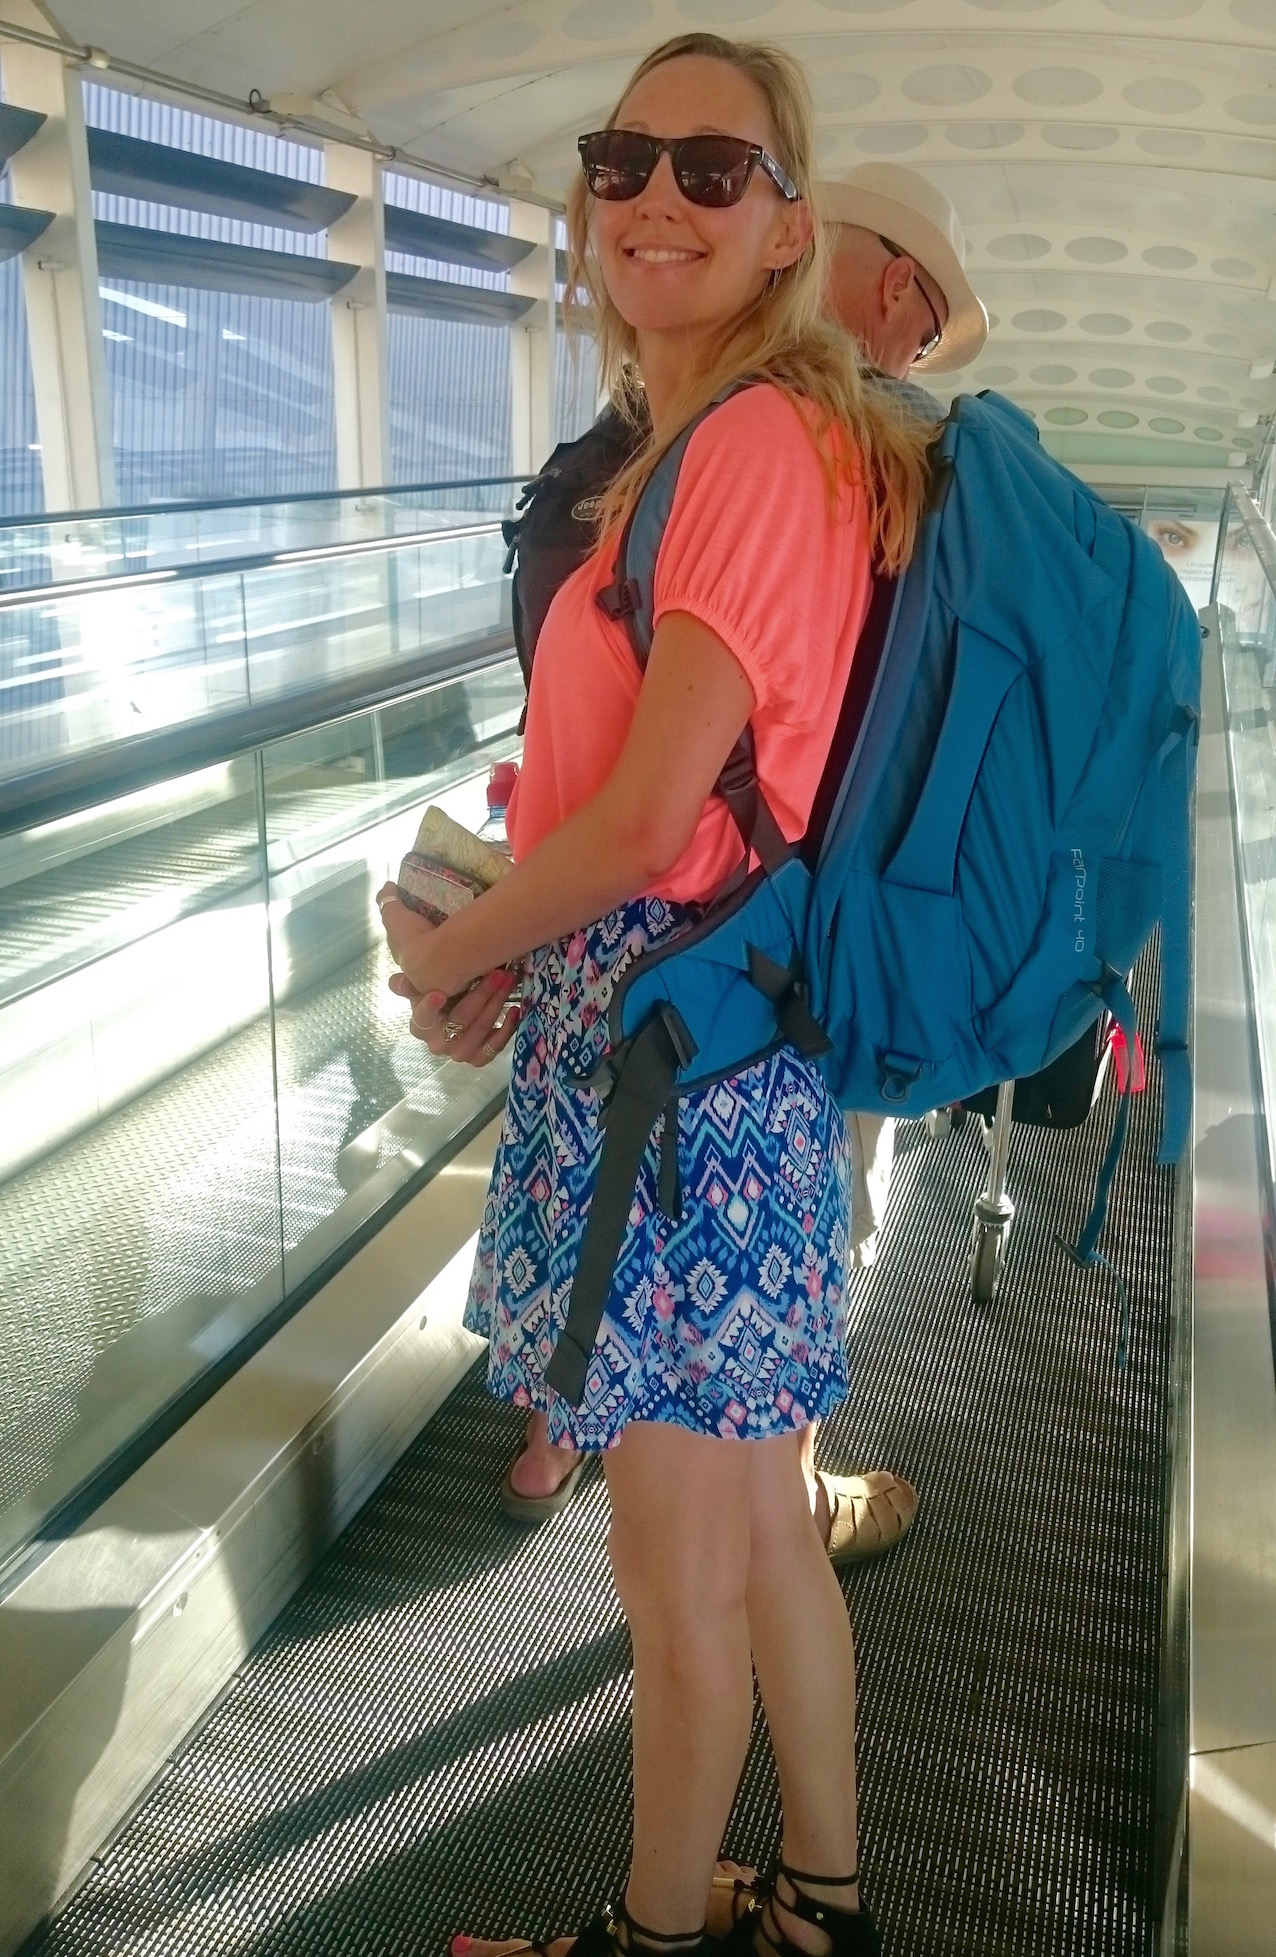 Hayley heading to the airport with her backpack ready for a trip